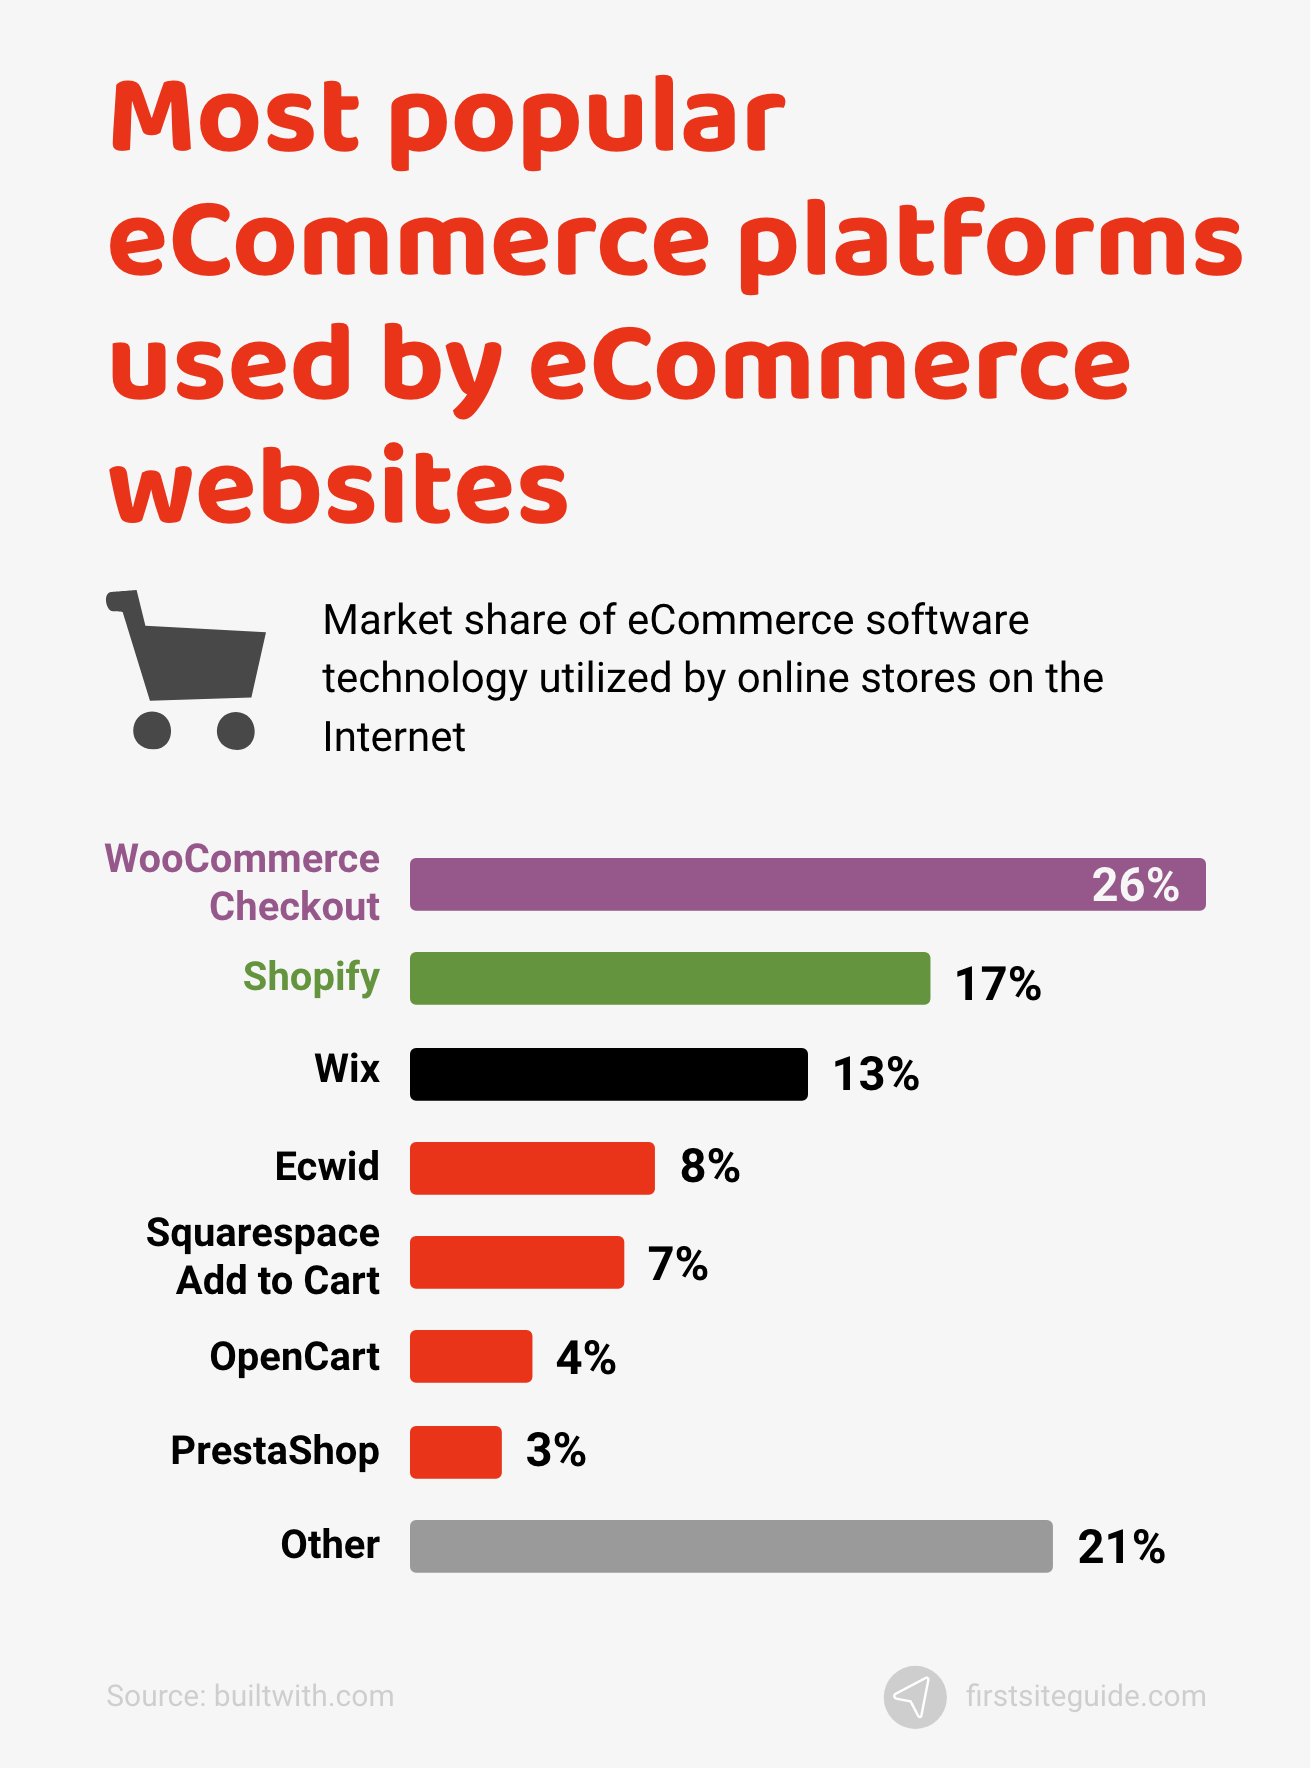 Most popular eCommerce platforms used by eCommerce websites